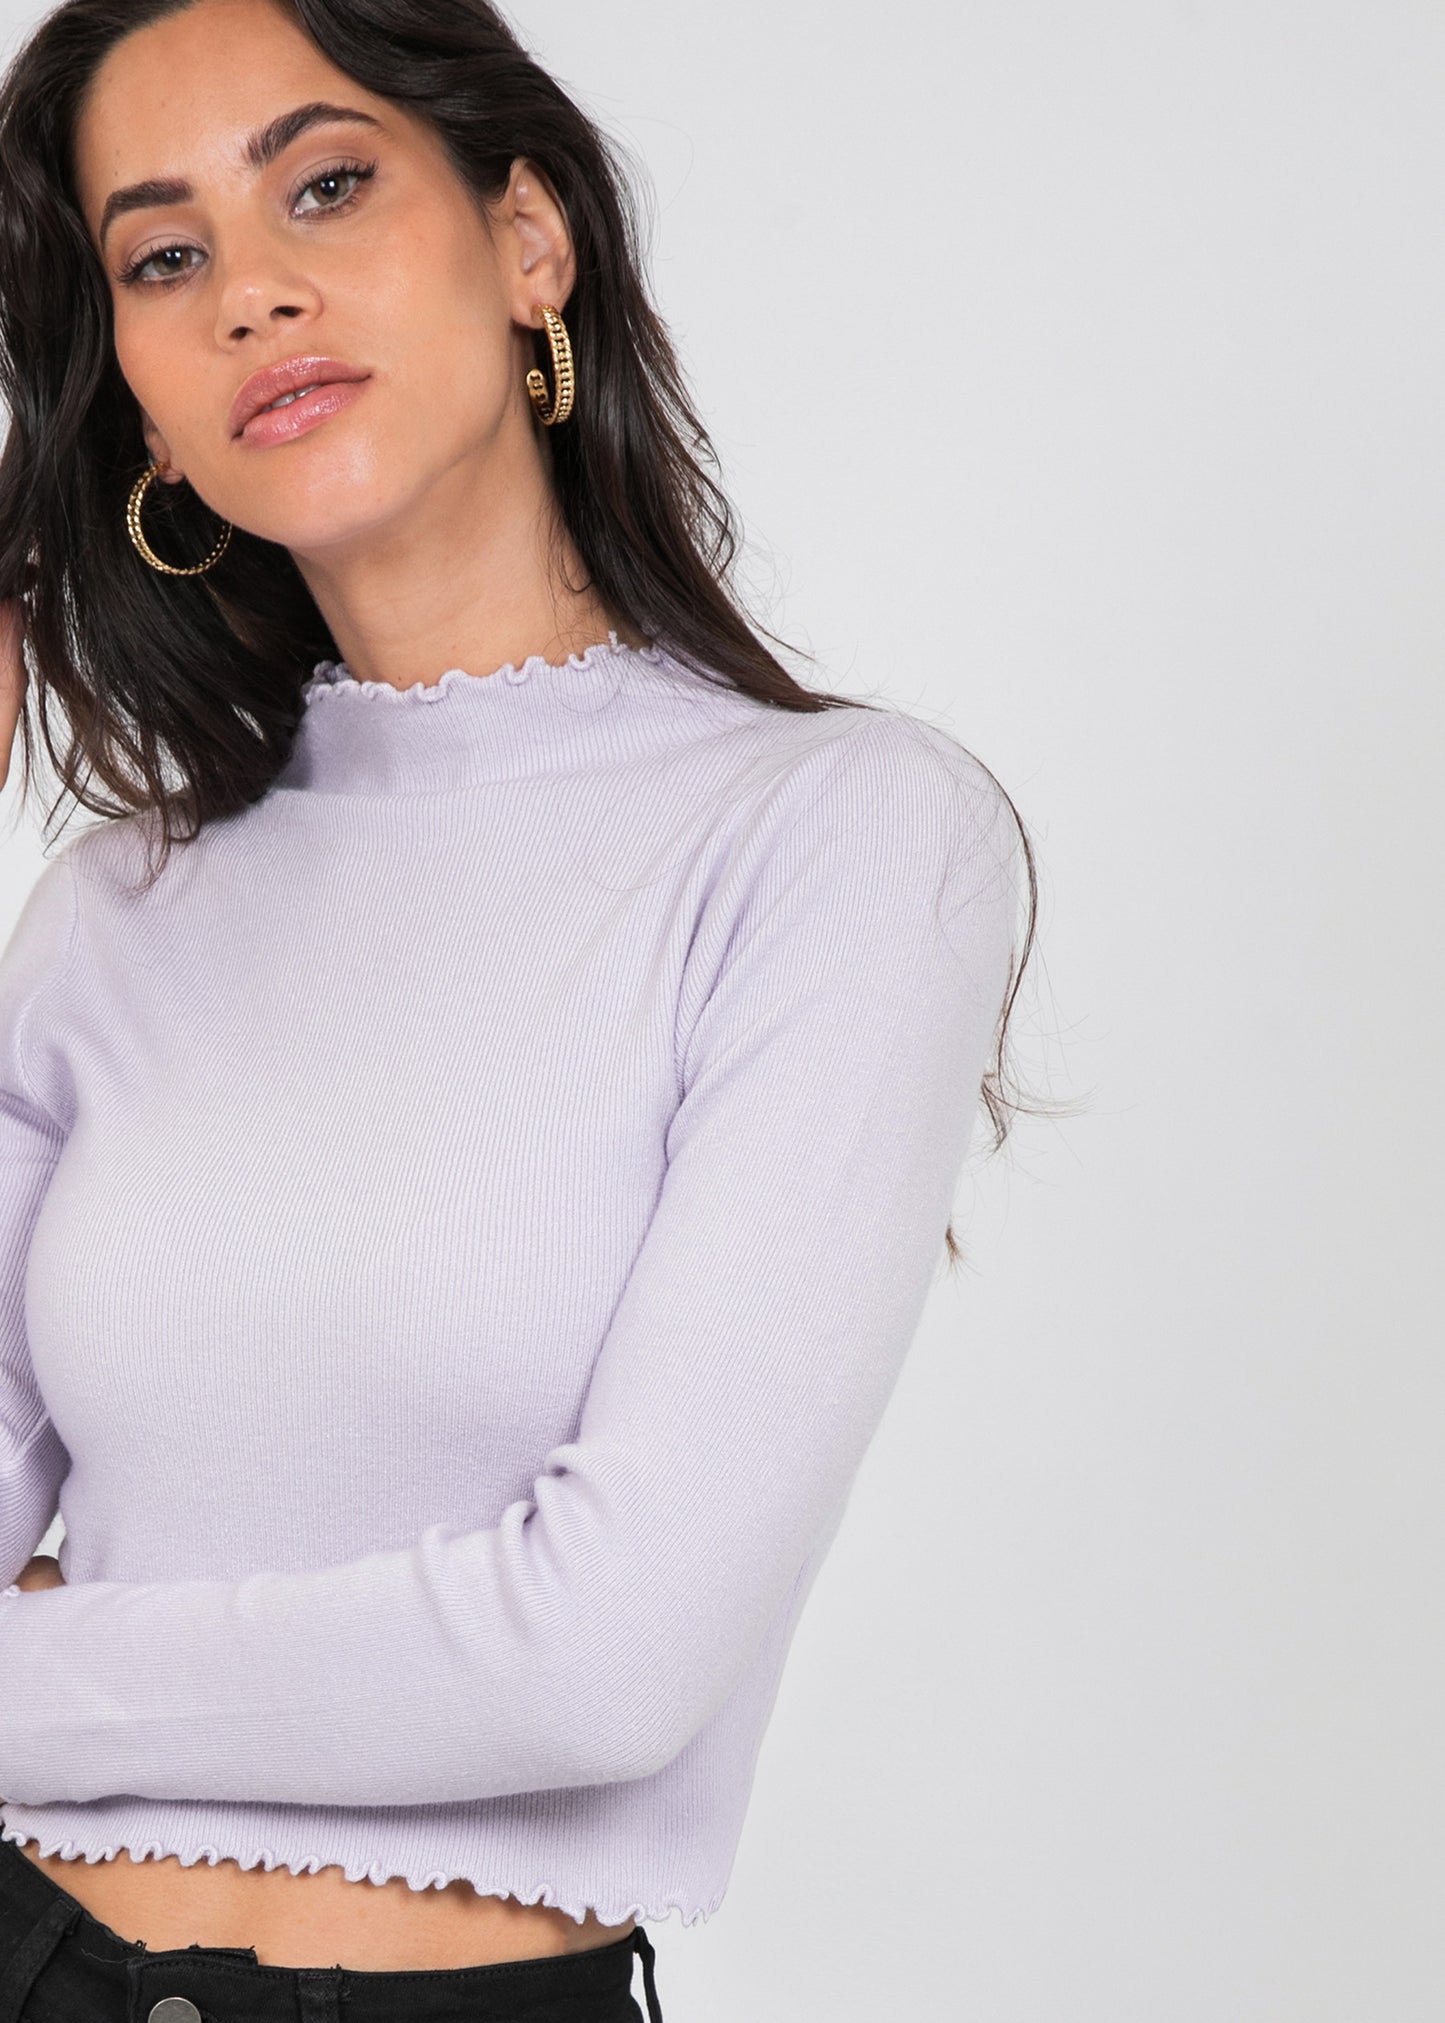 High neck jumper with ruffle hem in lilac